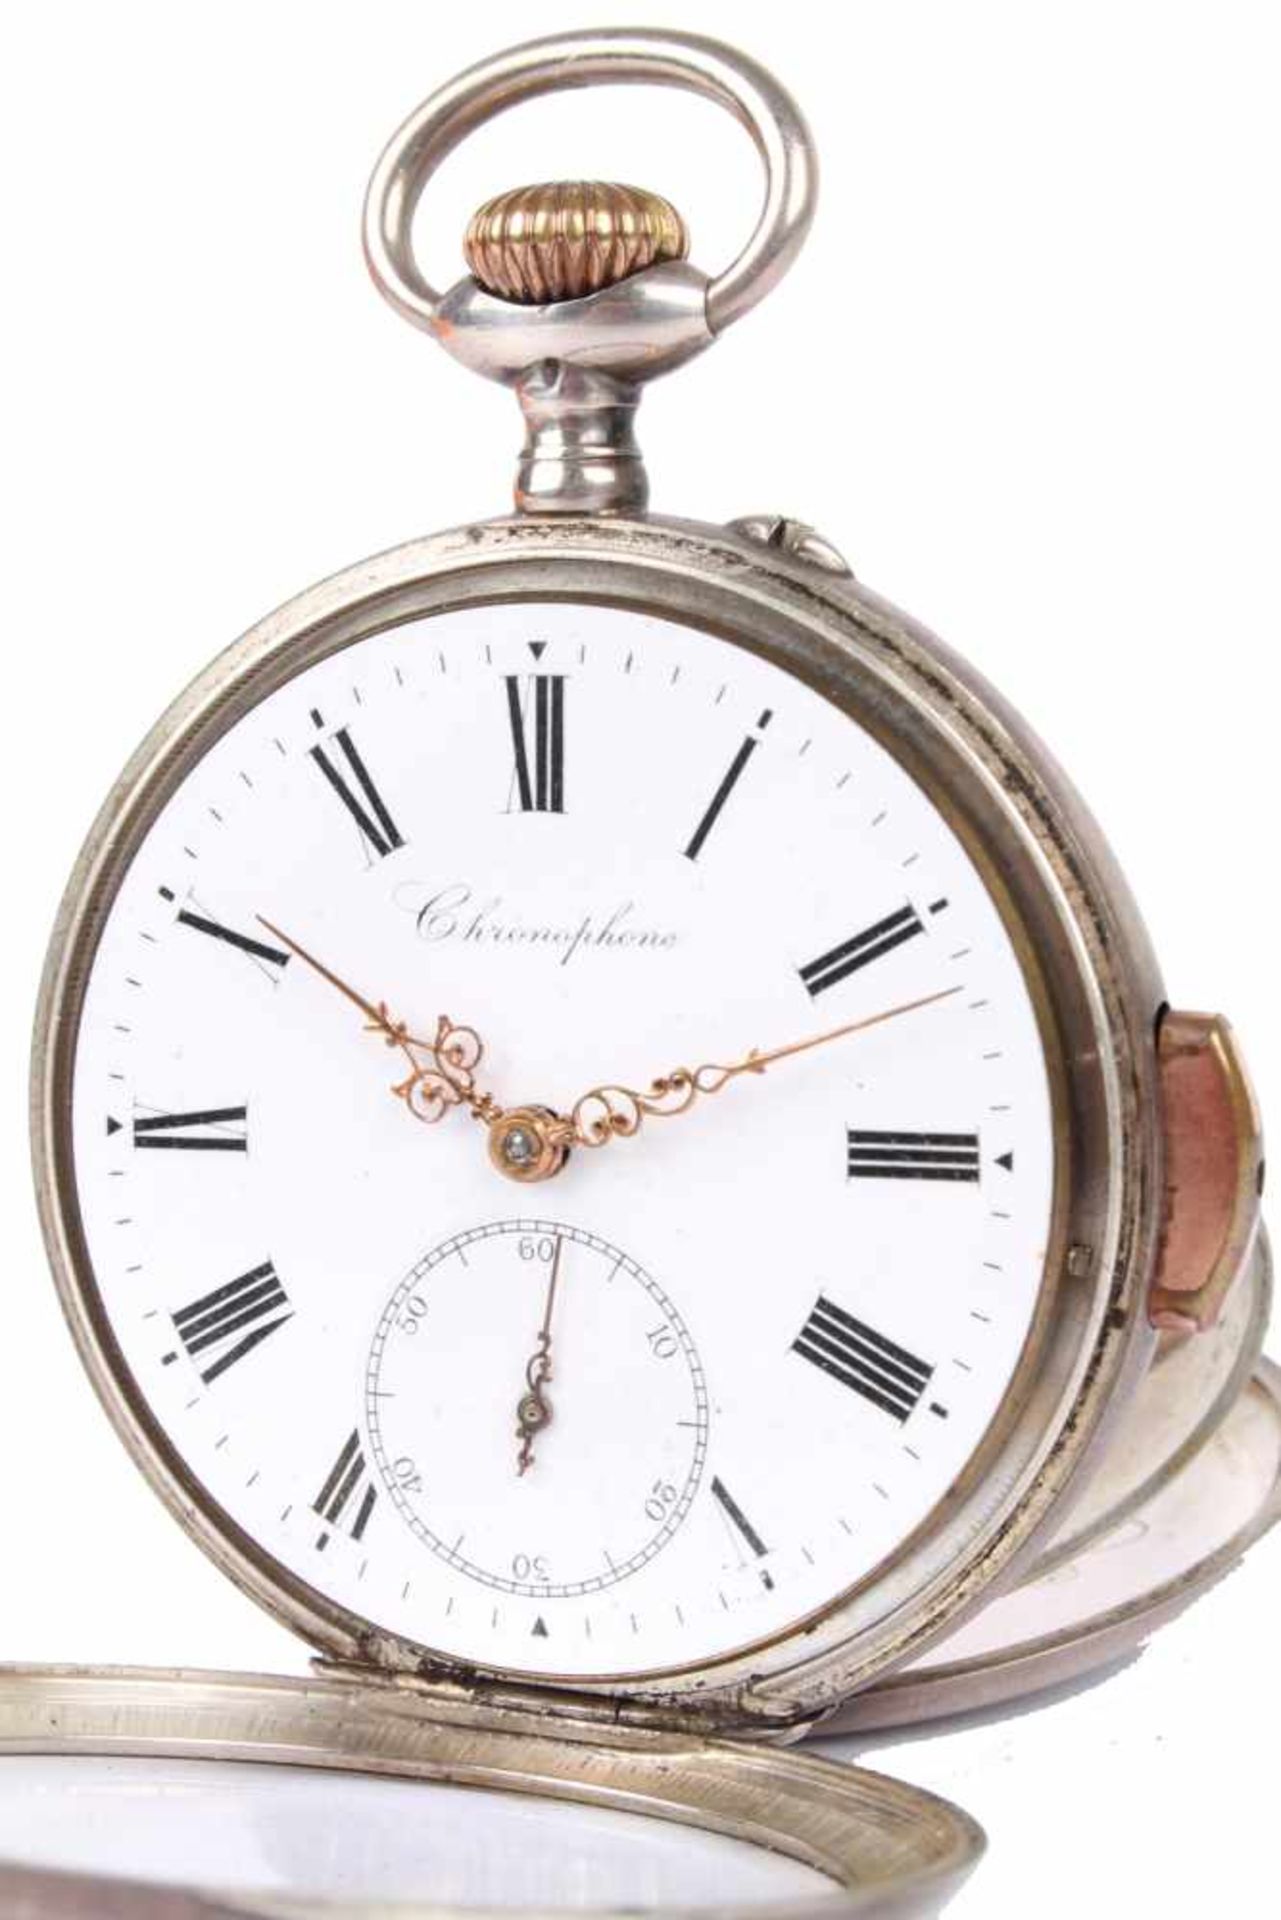 Repetier Taschenuhr um 1900, Silber, Chronophone,Repeater pocket watch 800 silver ca.. 1900,